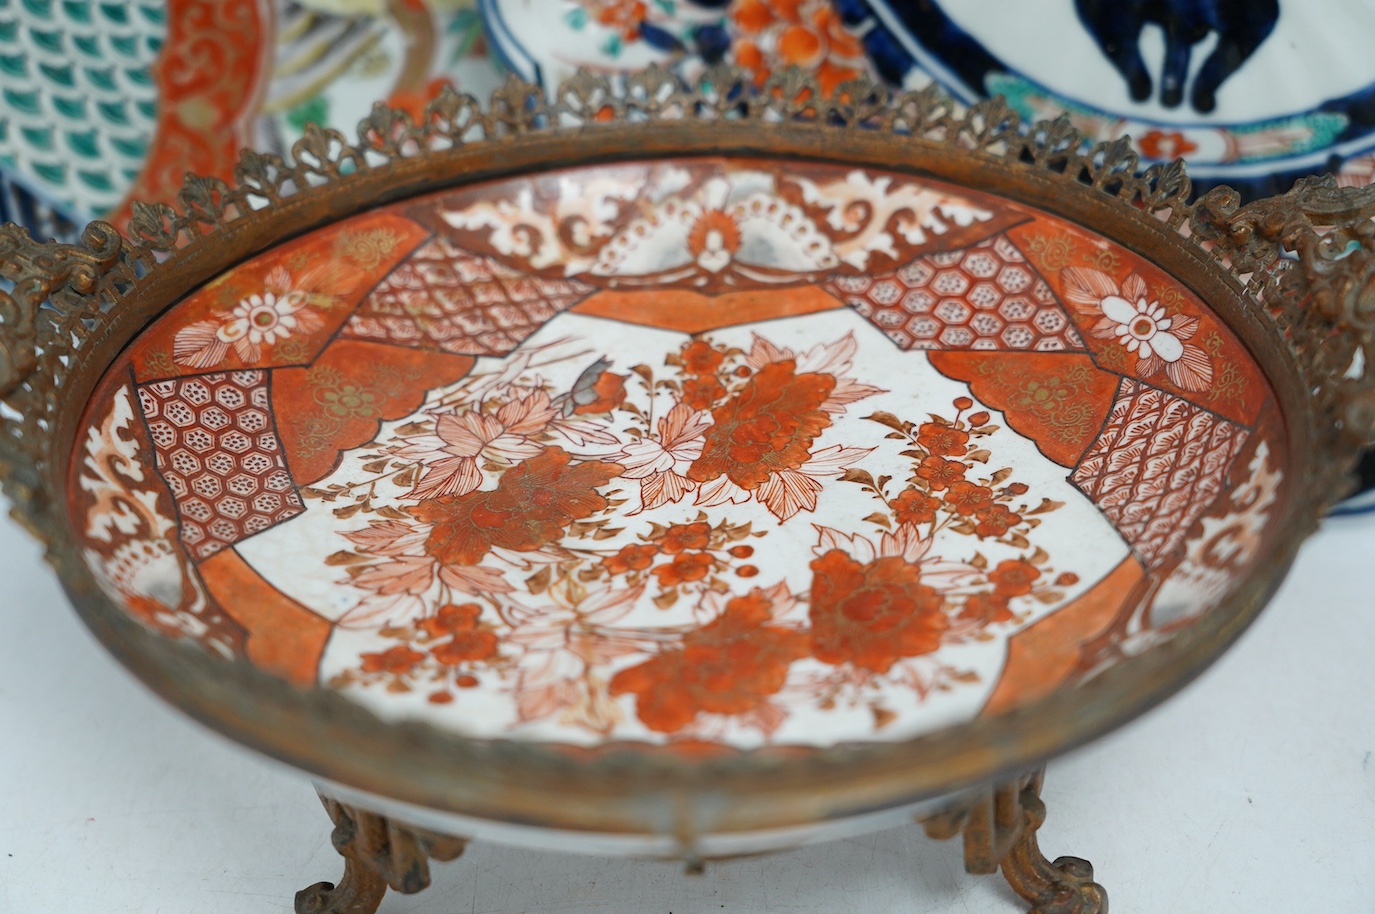 Five Japanese Imari dishes and a Kutani gilt metal mounted bowl, Meiji period, largest 35cm. Condition - poor to fair